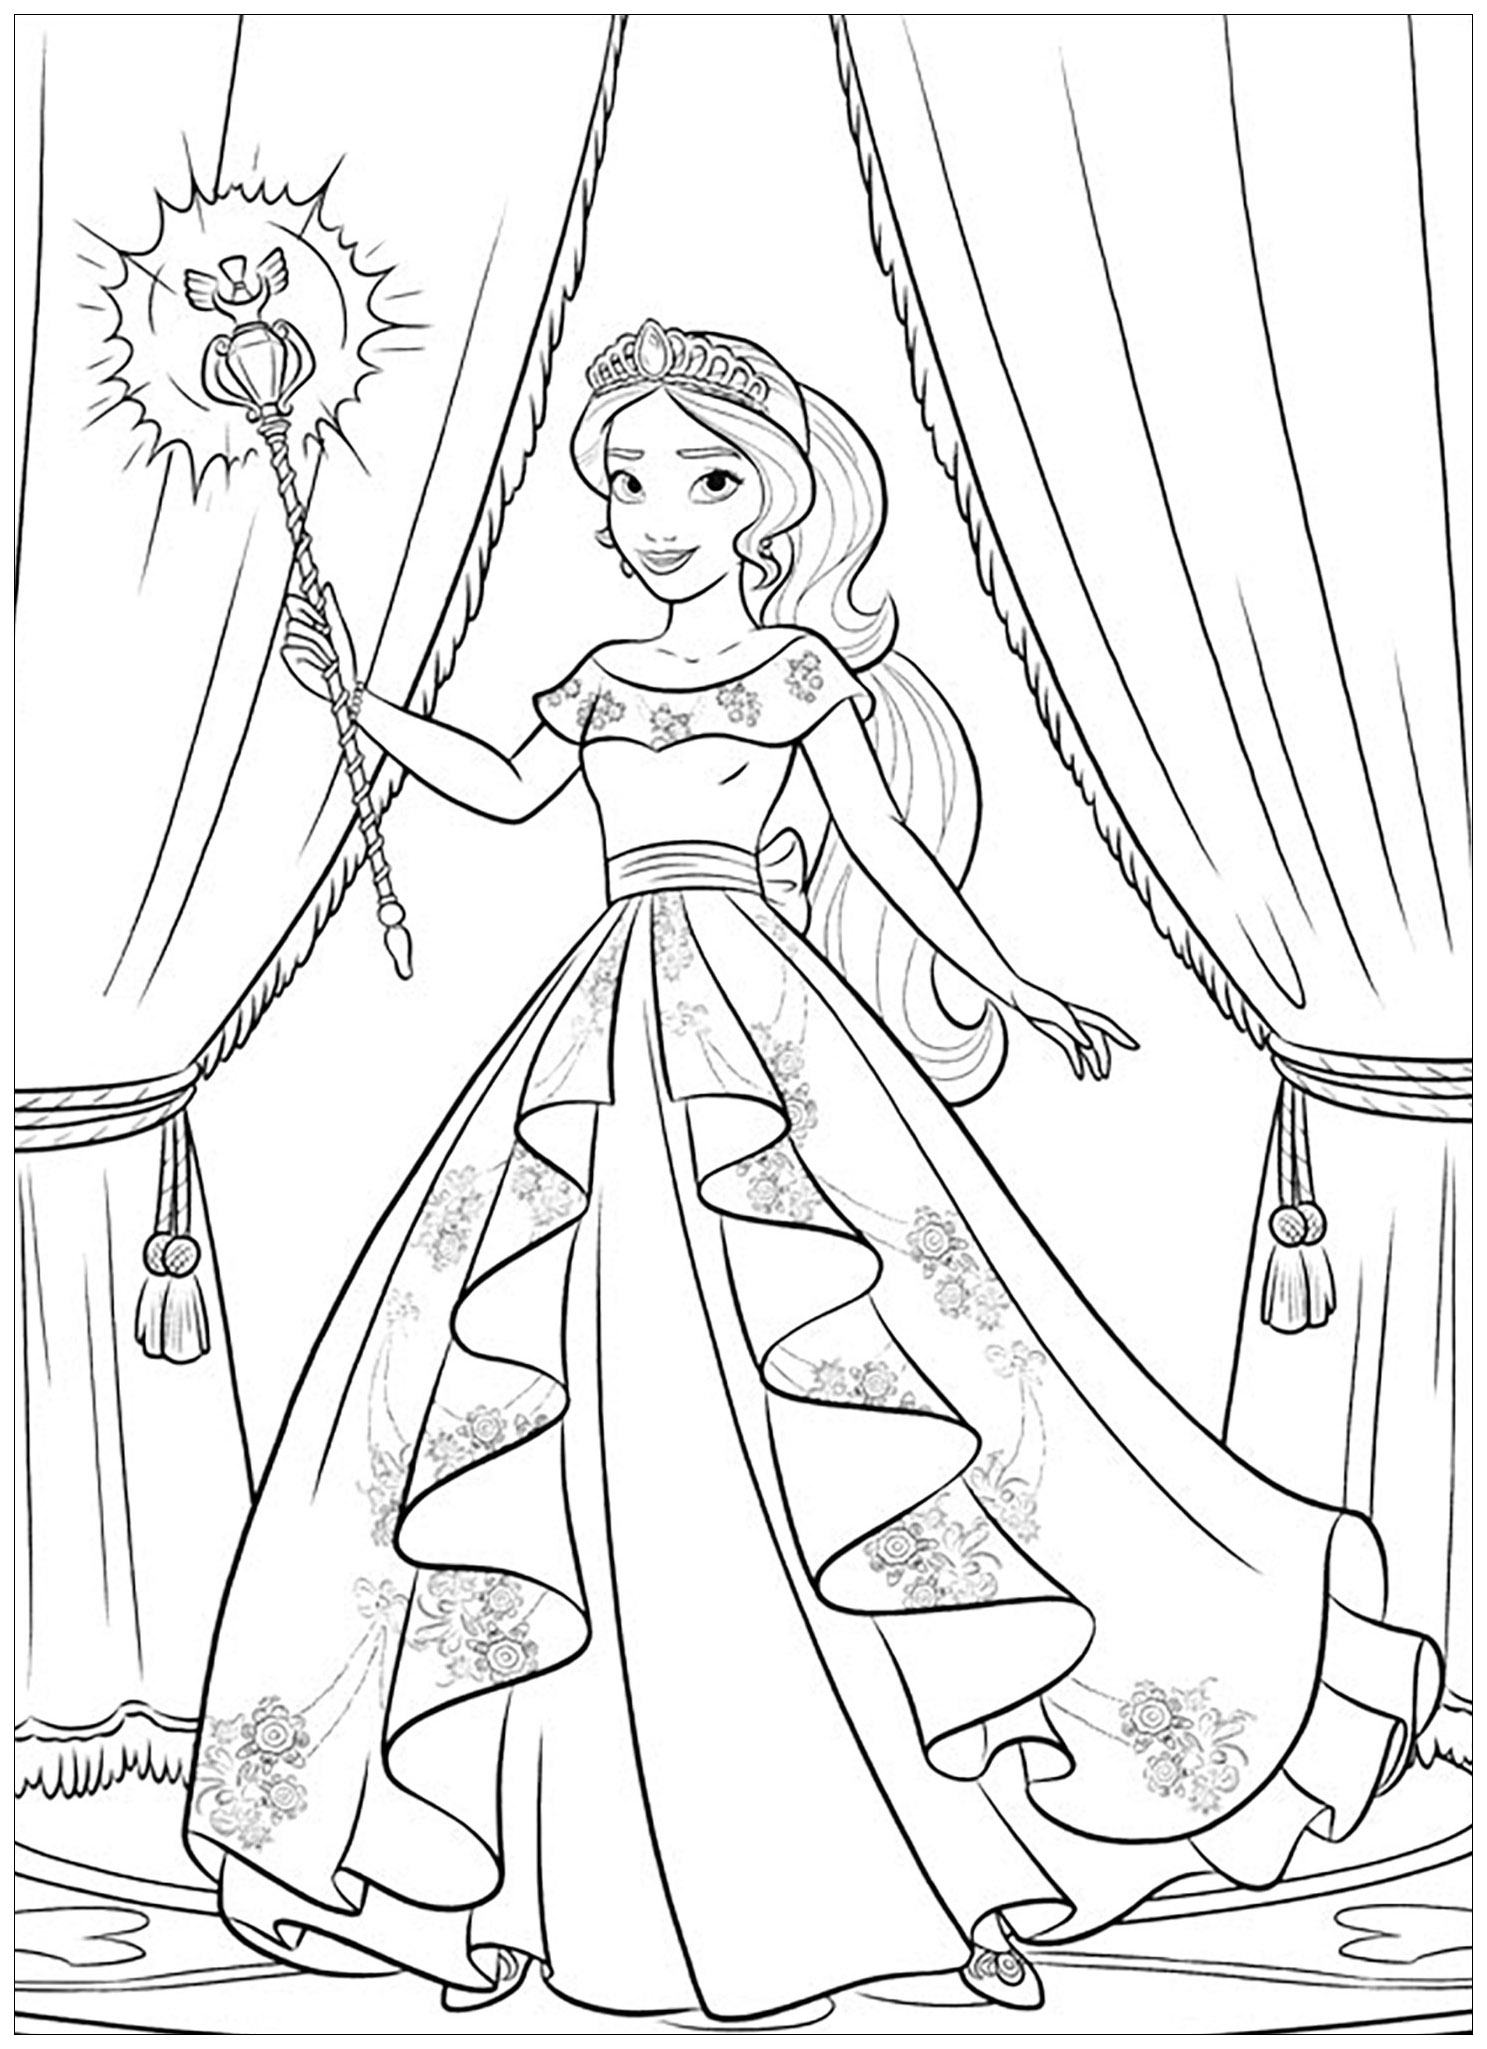 Drawing of Elena Avalor to download and print for children